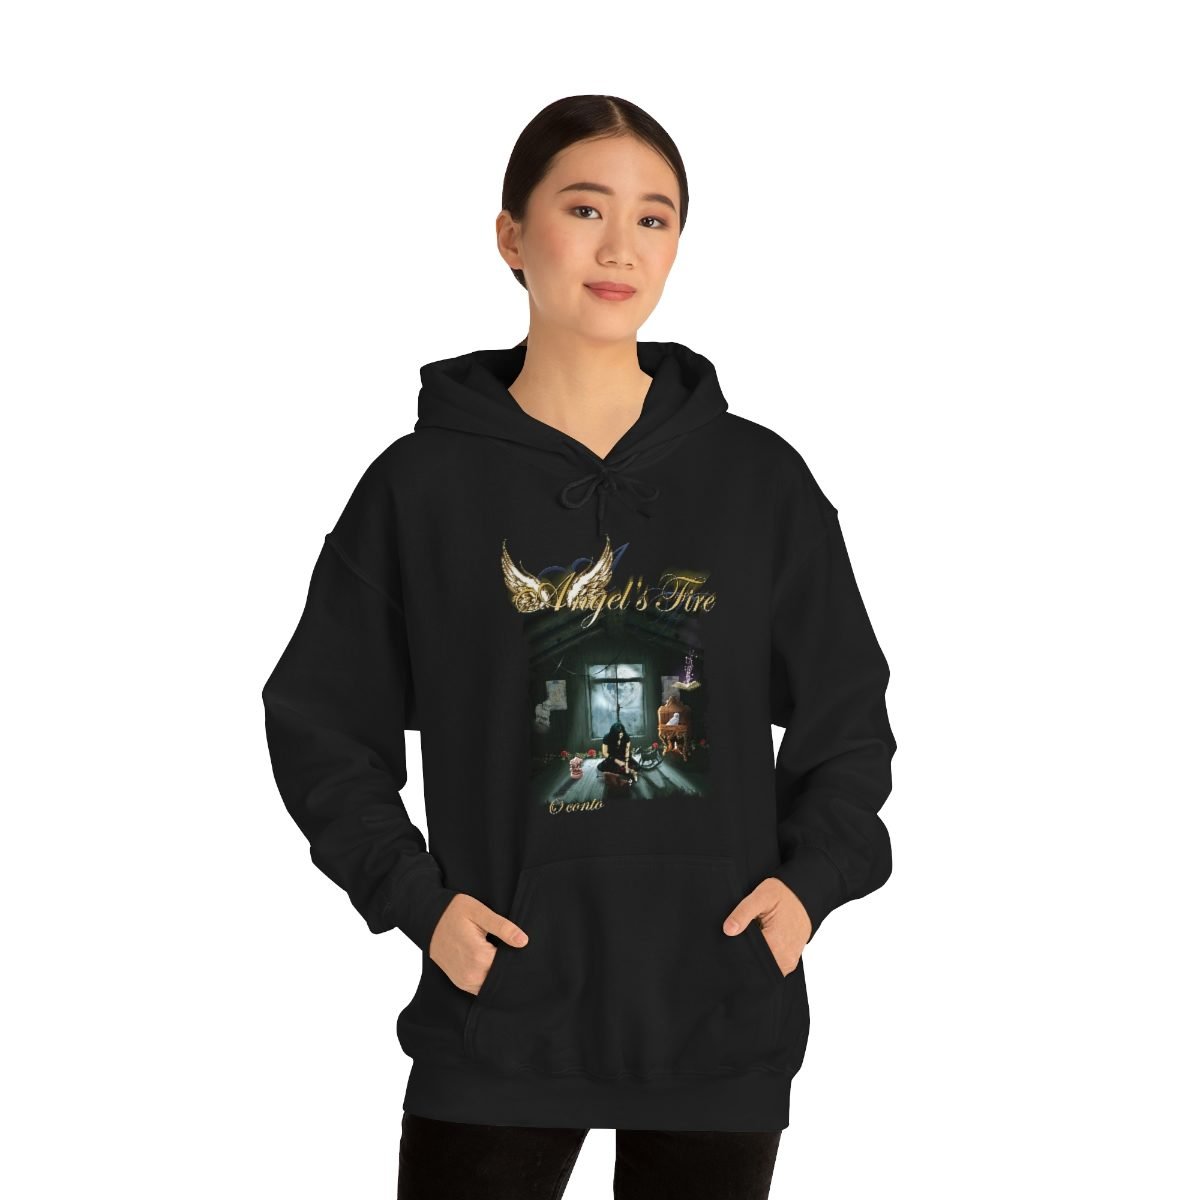 Angel’s Fire – O Conto Pullover Hooded Sweatshirt